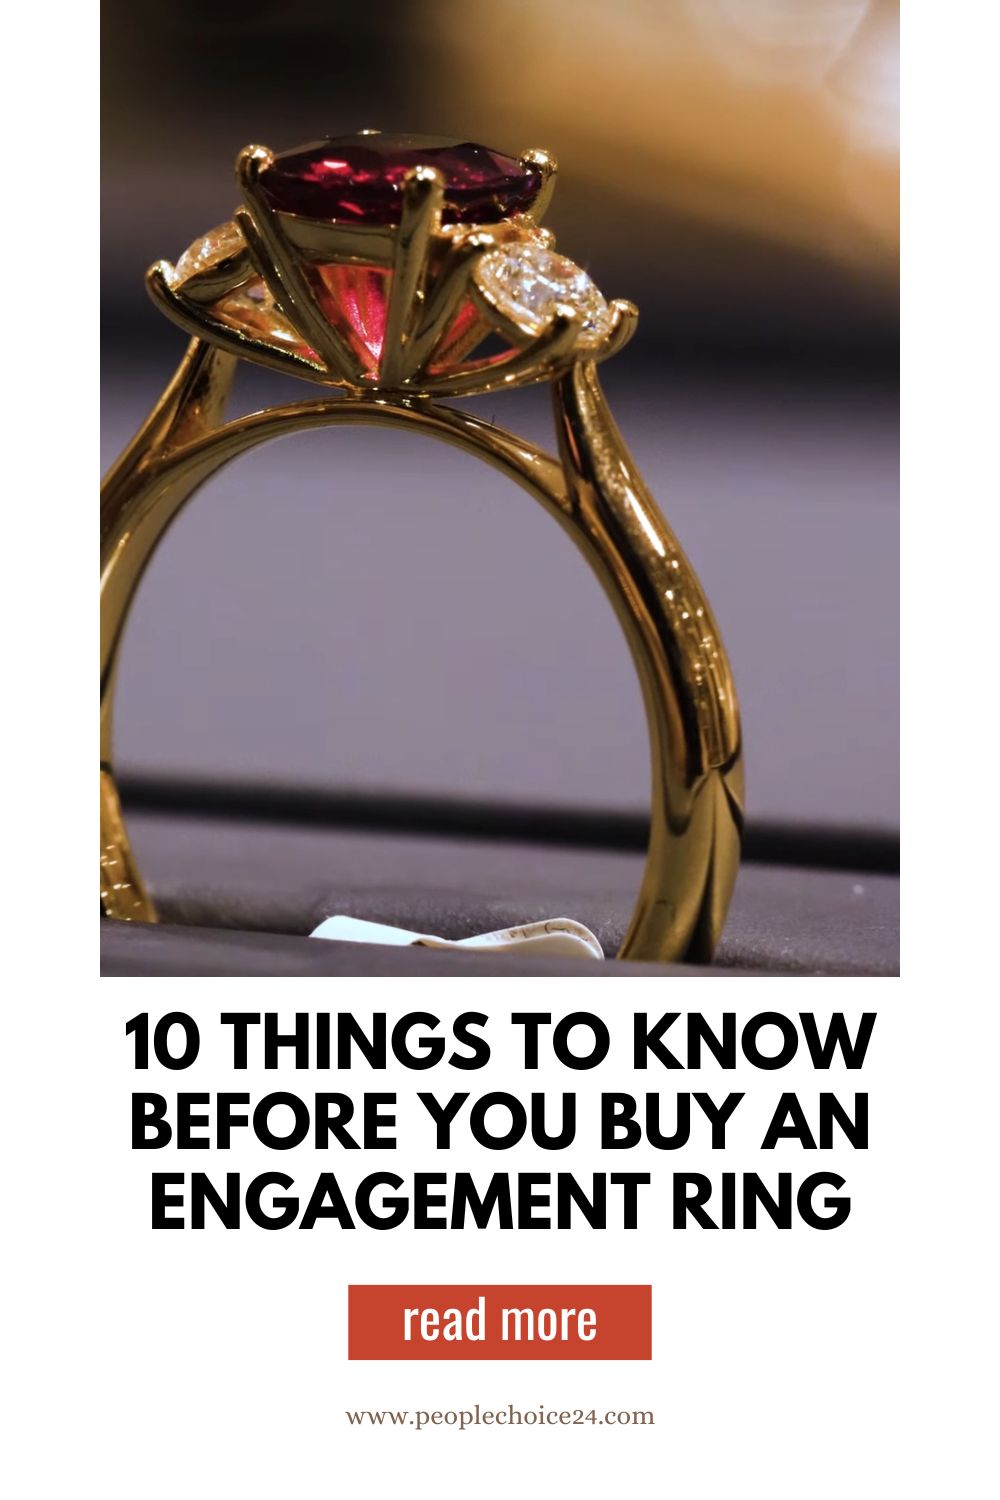 10 Answer to Know Before You Buy an Engagement Ring